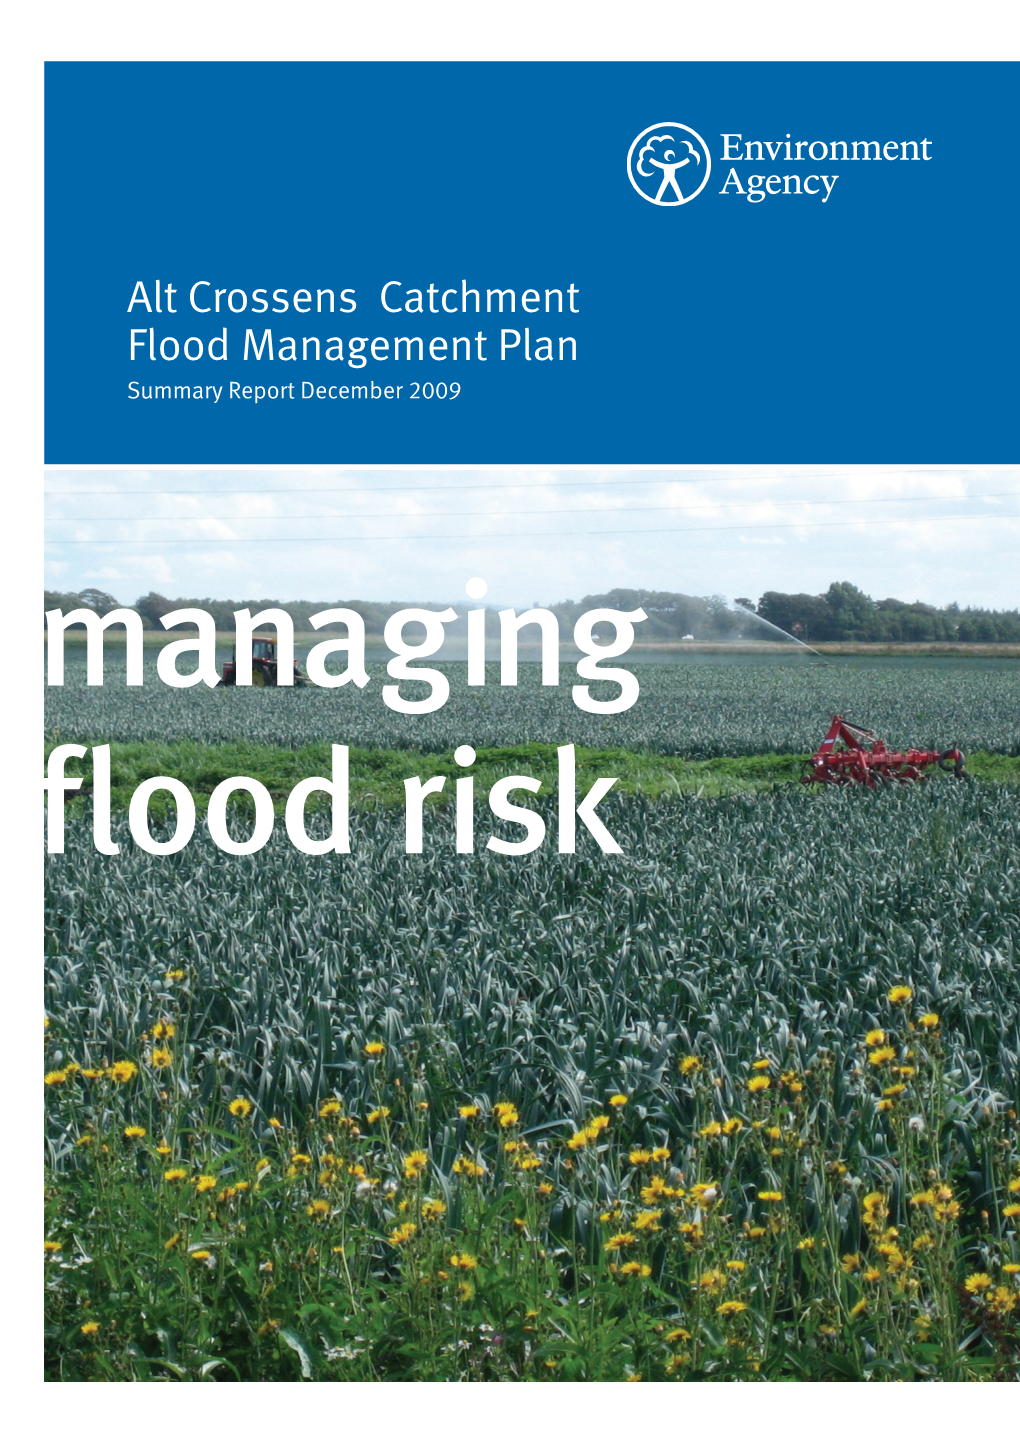 Alt Crossens Catchment Flood Management Plan Summary Report December 2009 Managing Flood Risk We Are the Environment Agency